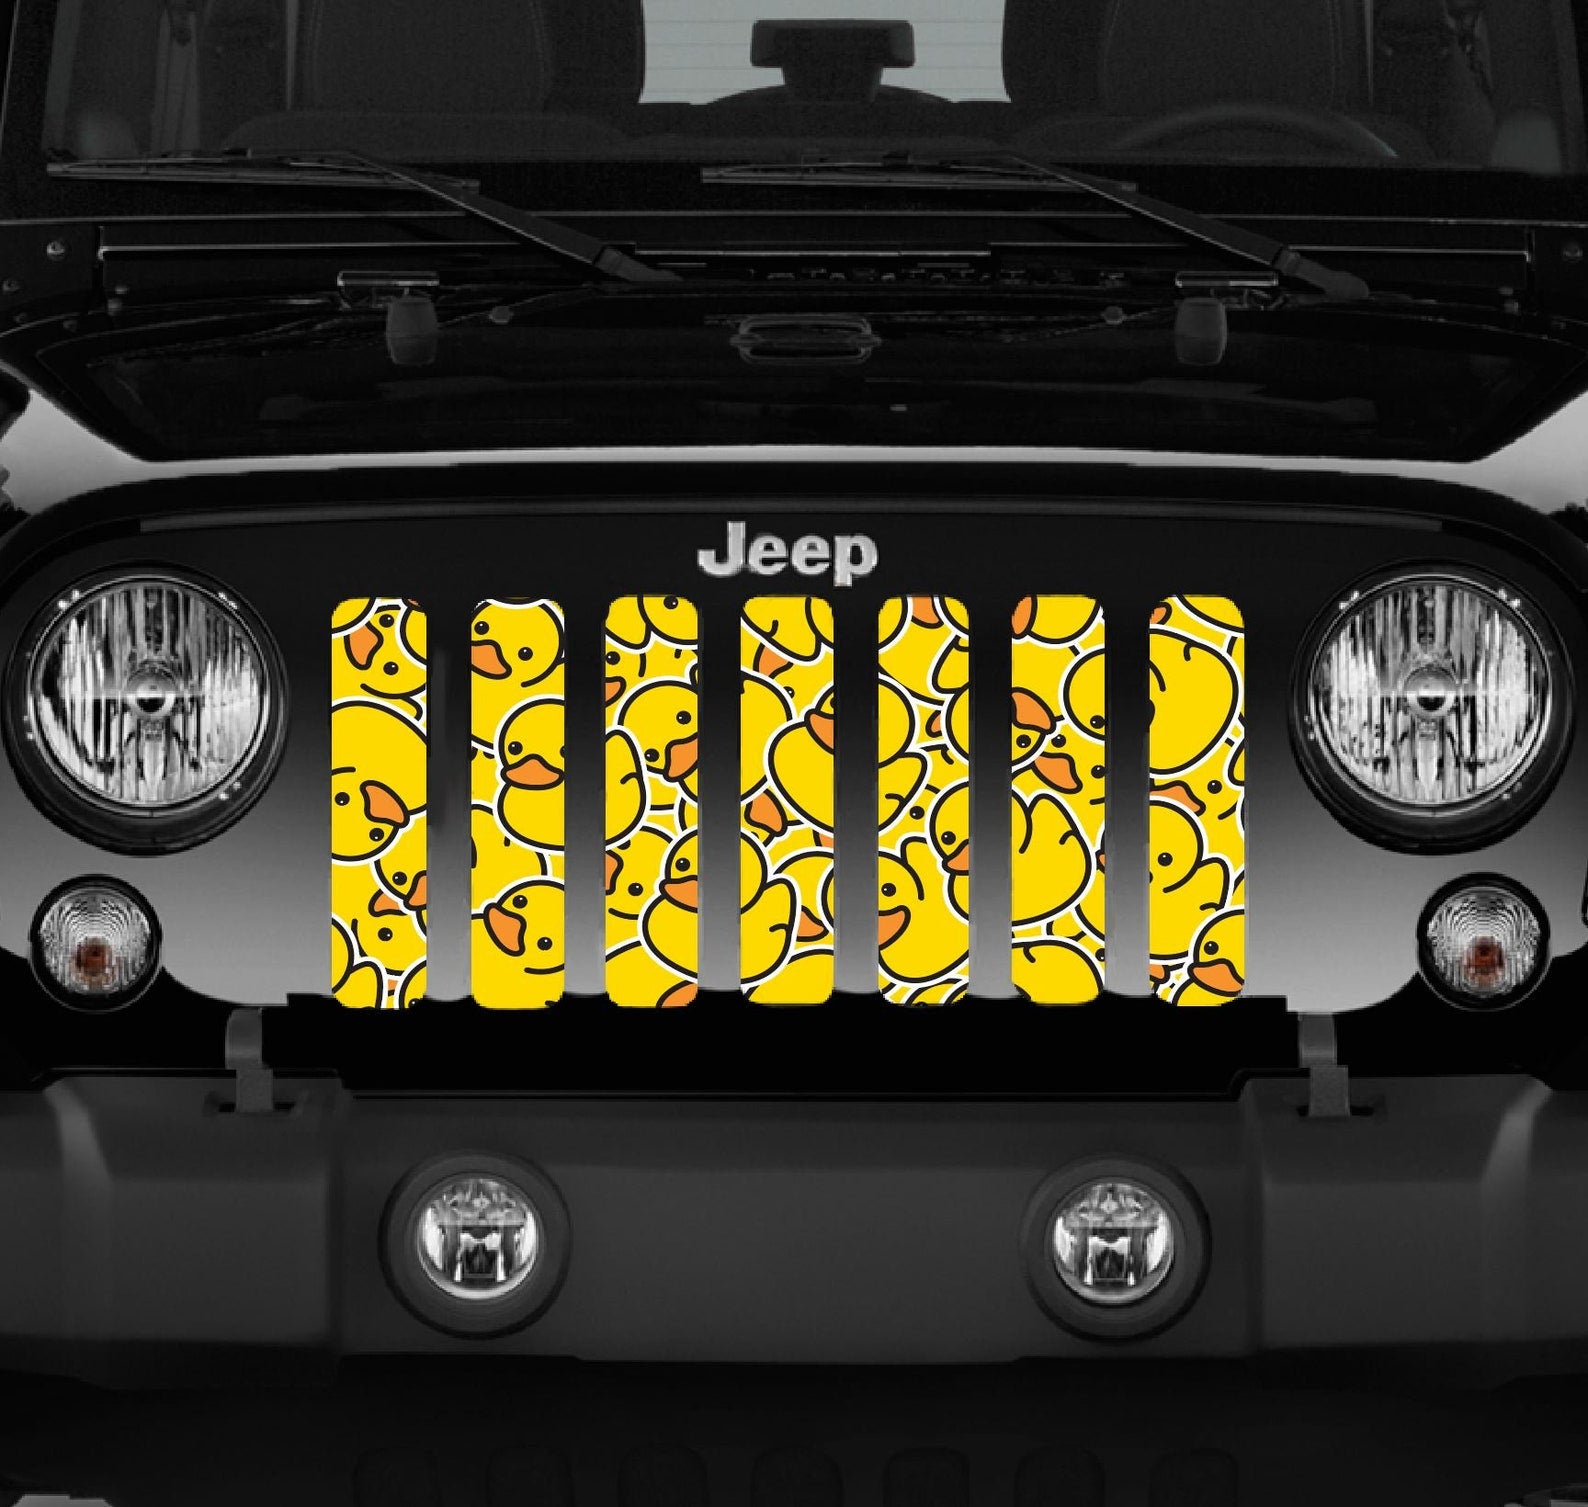 Close up view of a Black Jeep Wrangler showcasing Rubber Duck Pattern Design Jeep Grille Insert